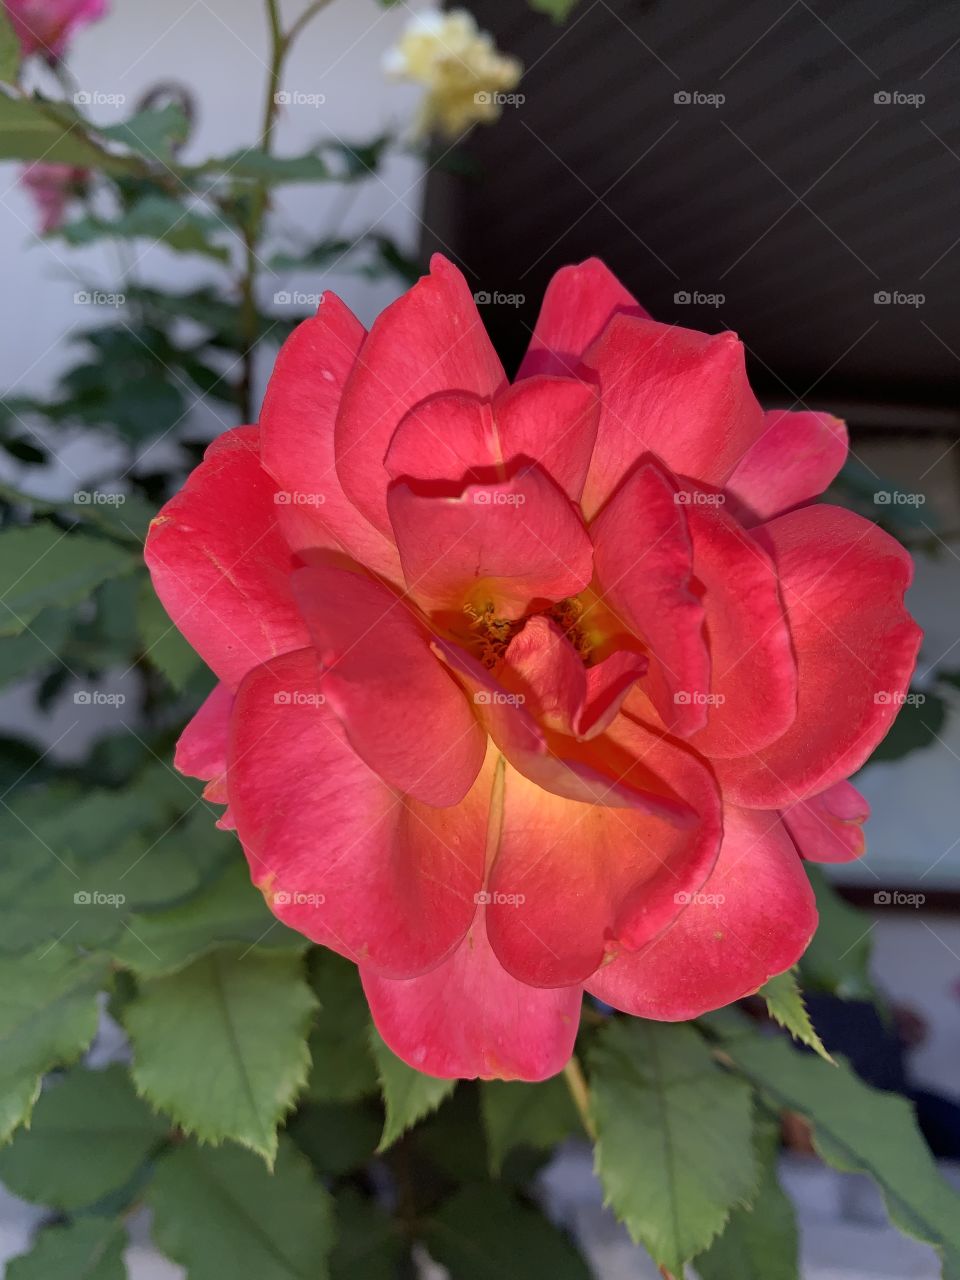 First bloom